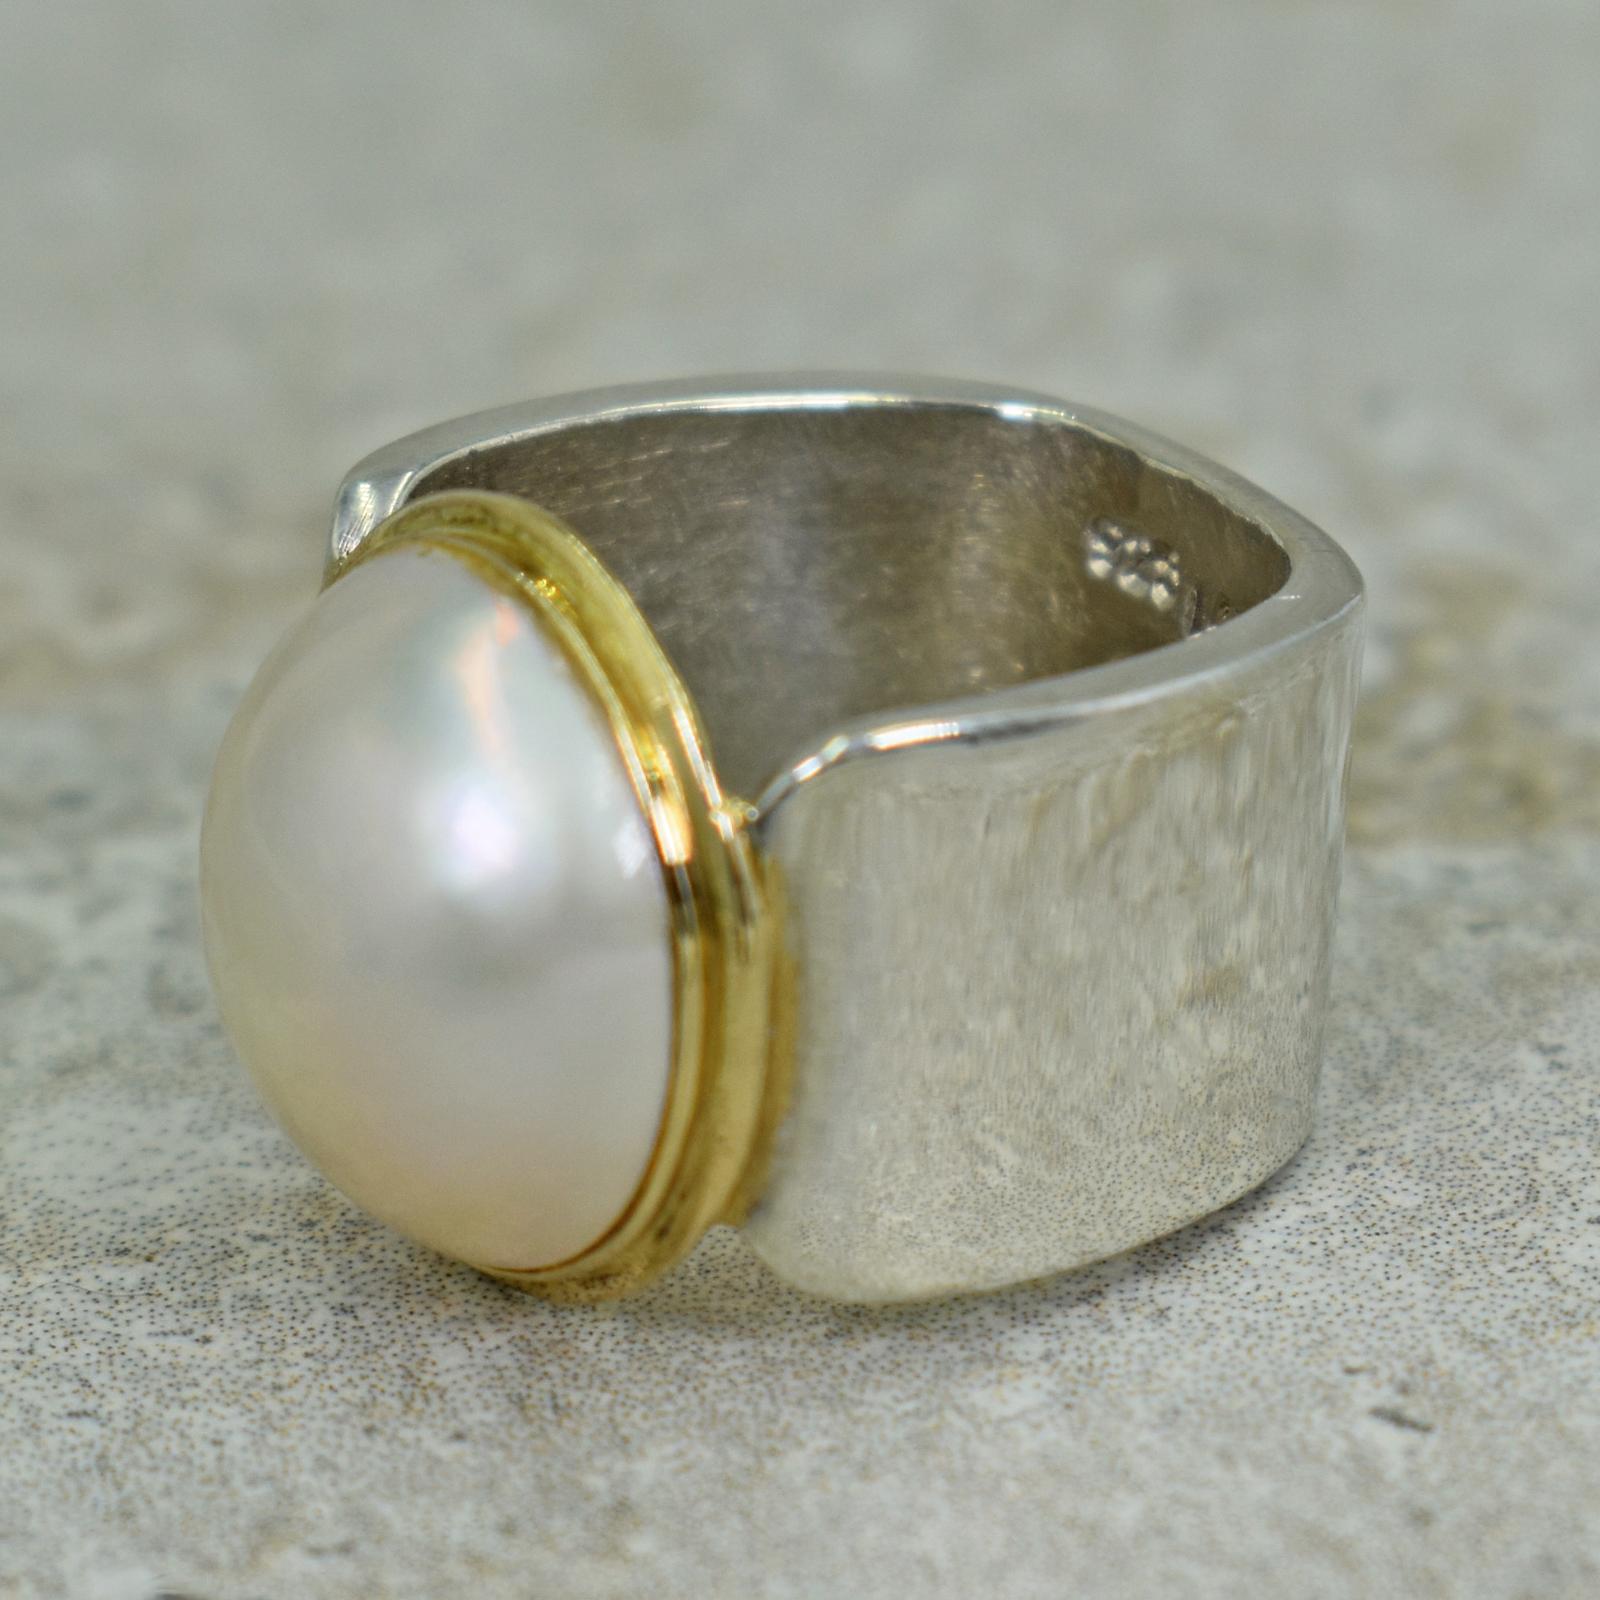 Mabé Freshwater Pearl set in a 14k yellow gold bezel on a sterling silver square ring band. Size 5. Ring is stamped 925, 14k and VO. Beautiful, classic pearl in a fresh, contemporary two-tone setting.